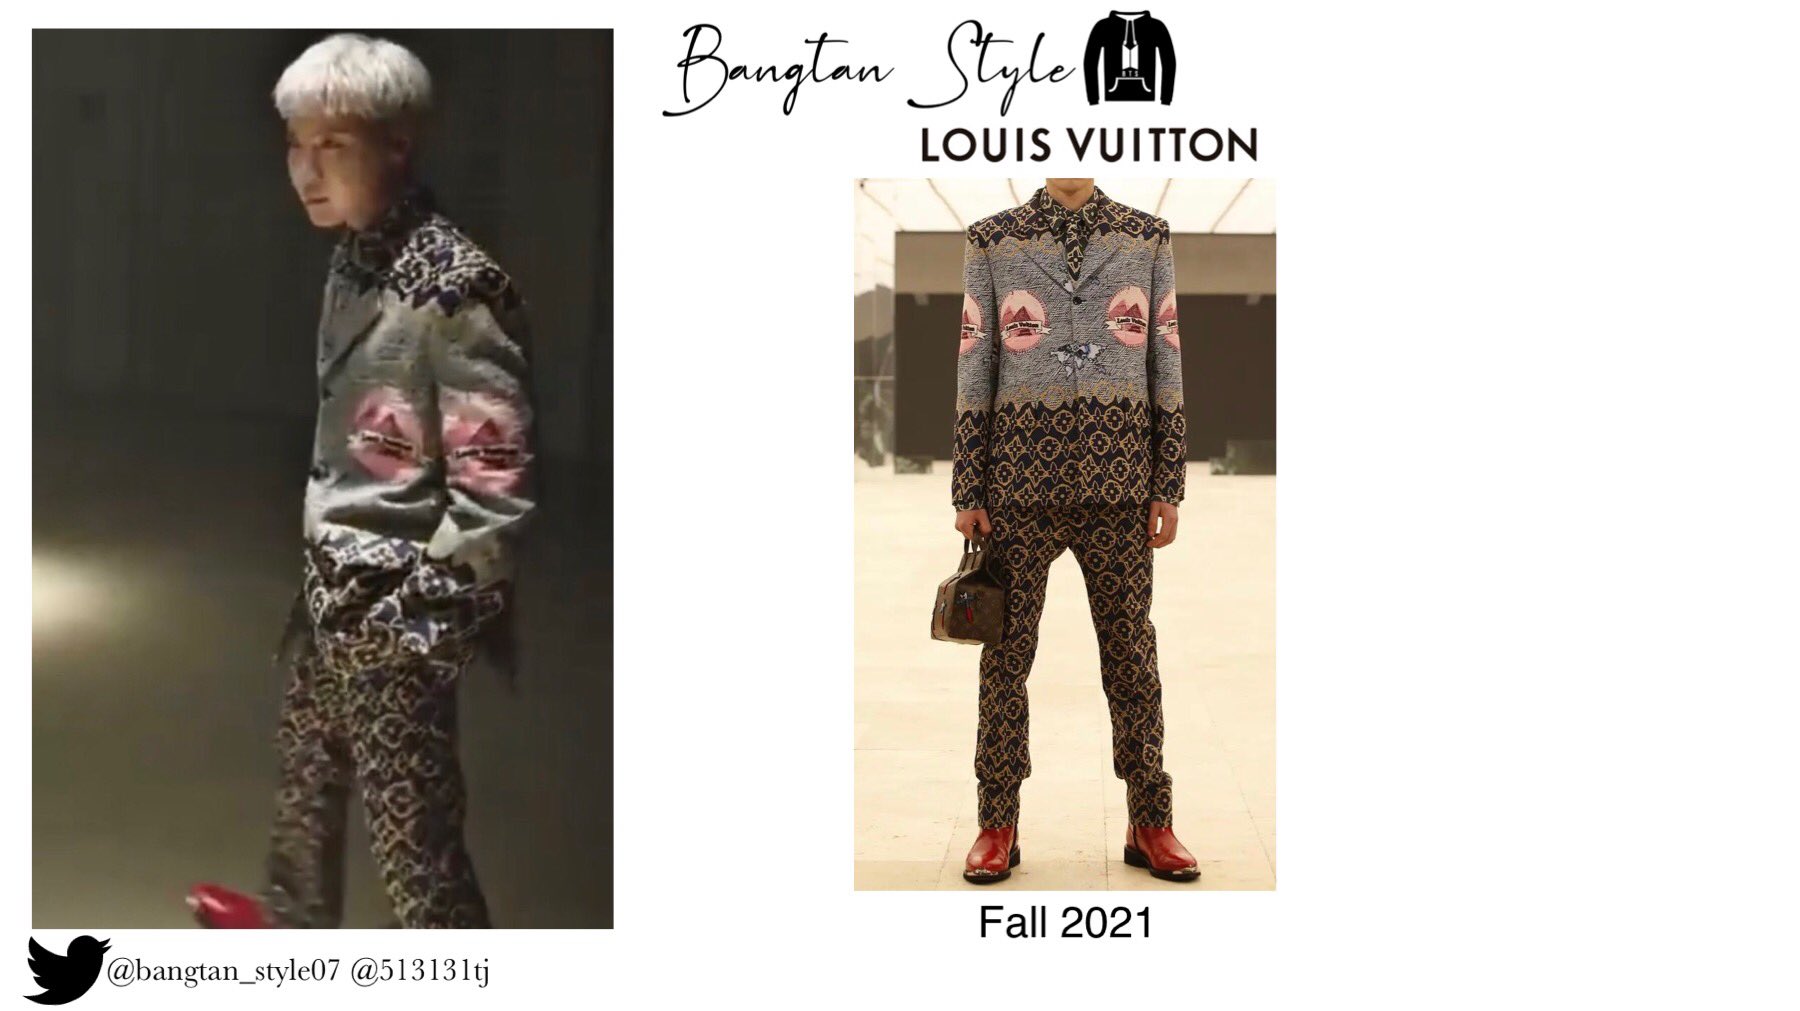 Bangtan Style⁷ (slow) on X: Twitter Post 210708 Hobi wears Louis Vuitton  Wrap Coat ($4600) & LV Dust Sunglasses ($735). He also holds a Coffee  Cup Monogram Bag ($1775) & Newspaper Pouch ($